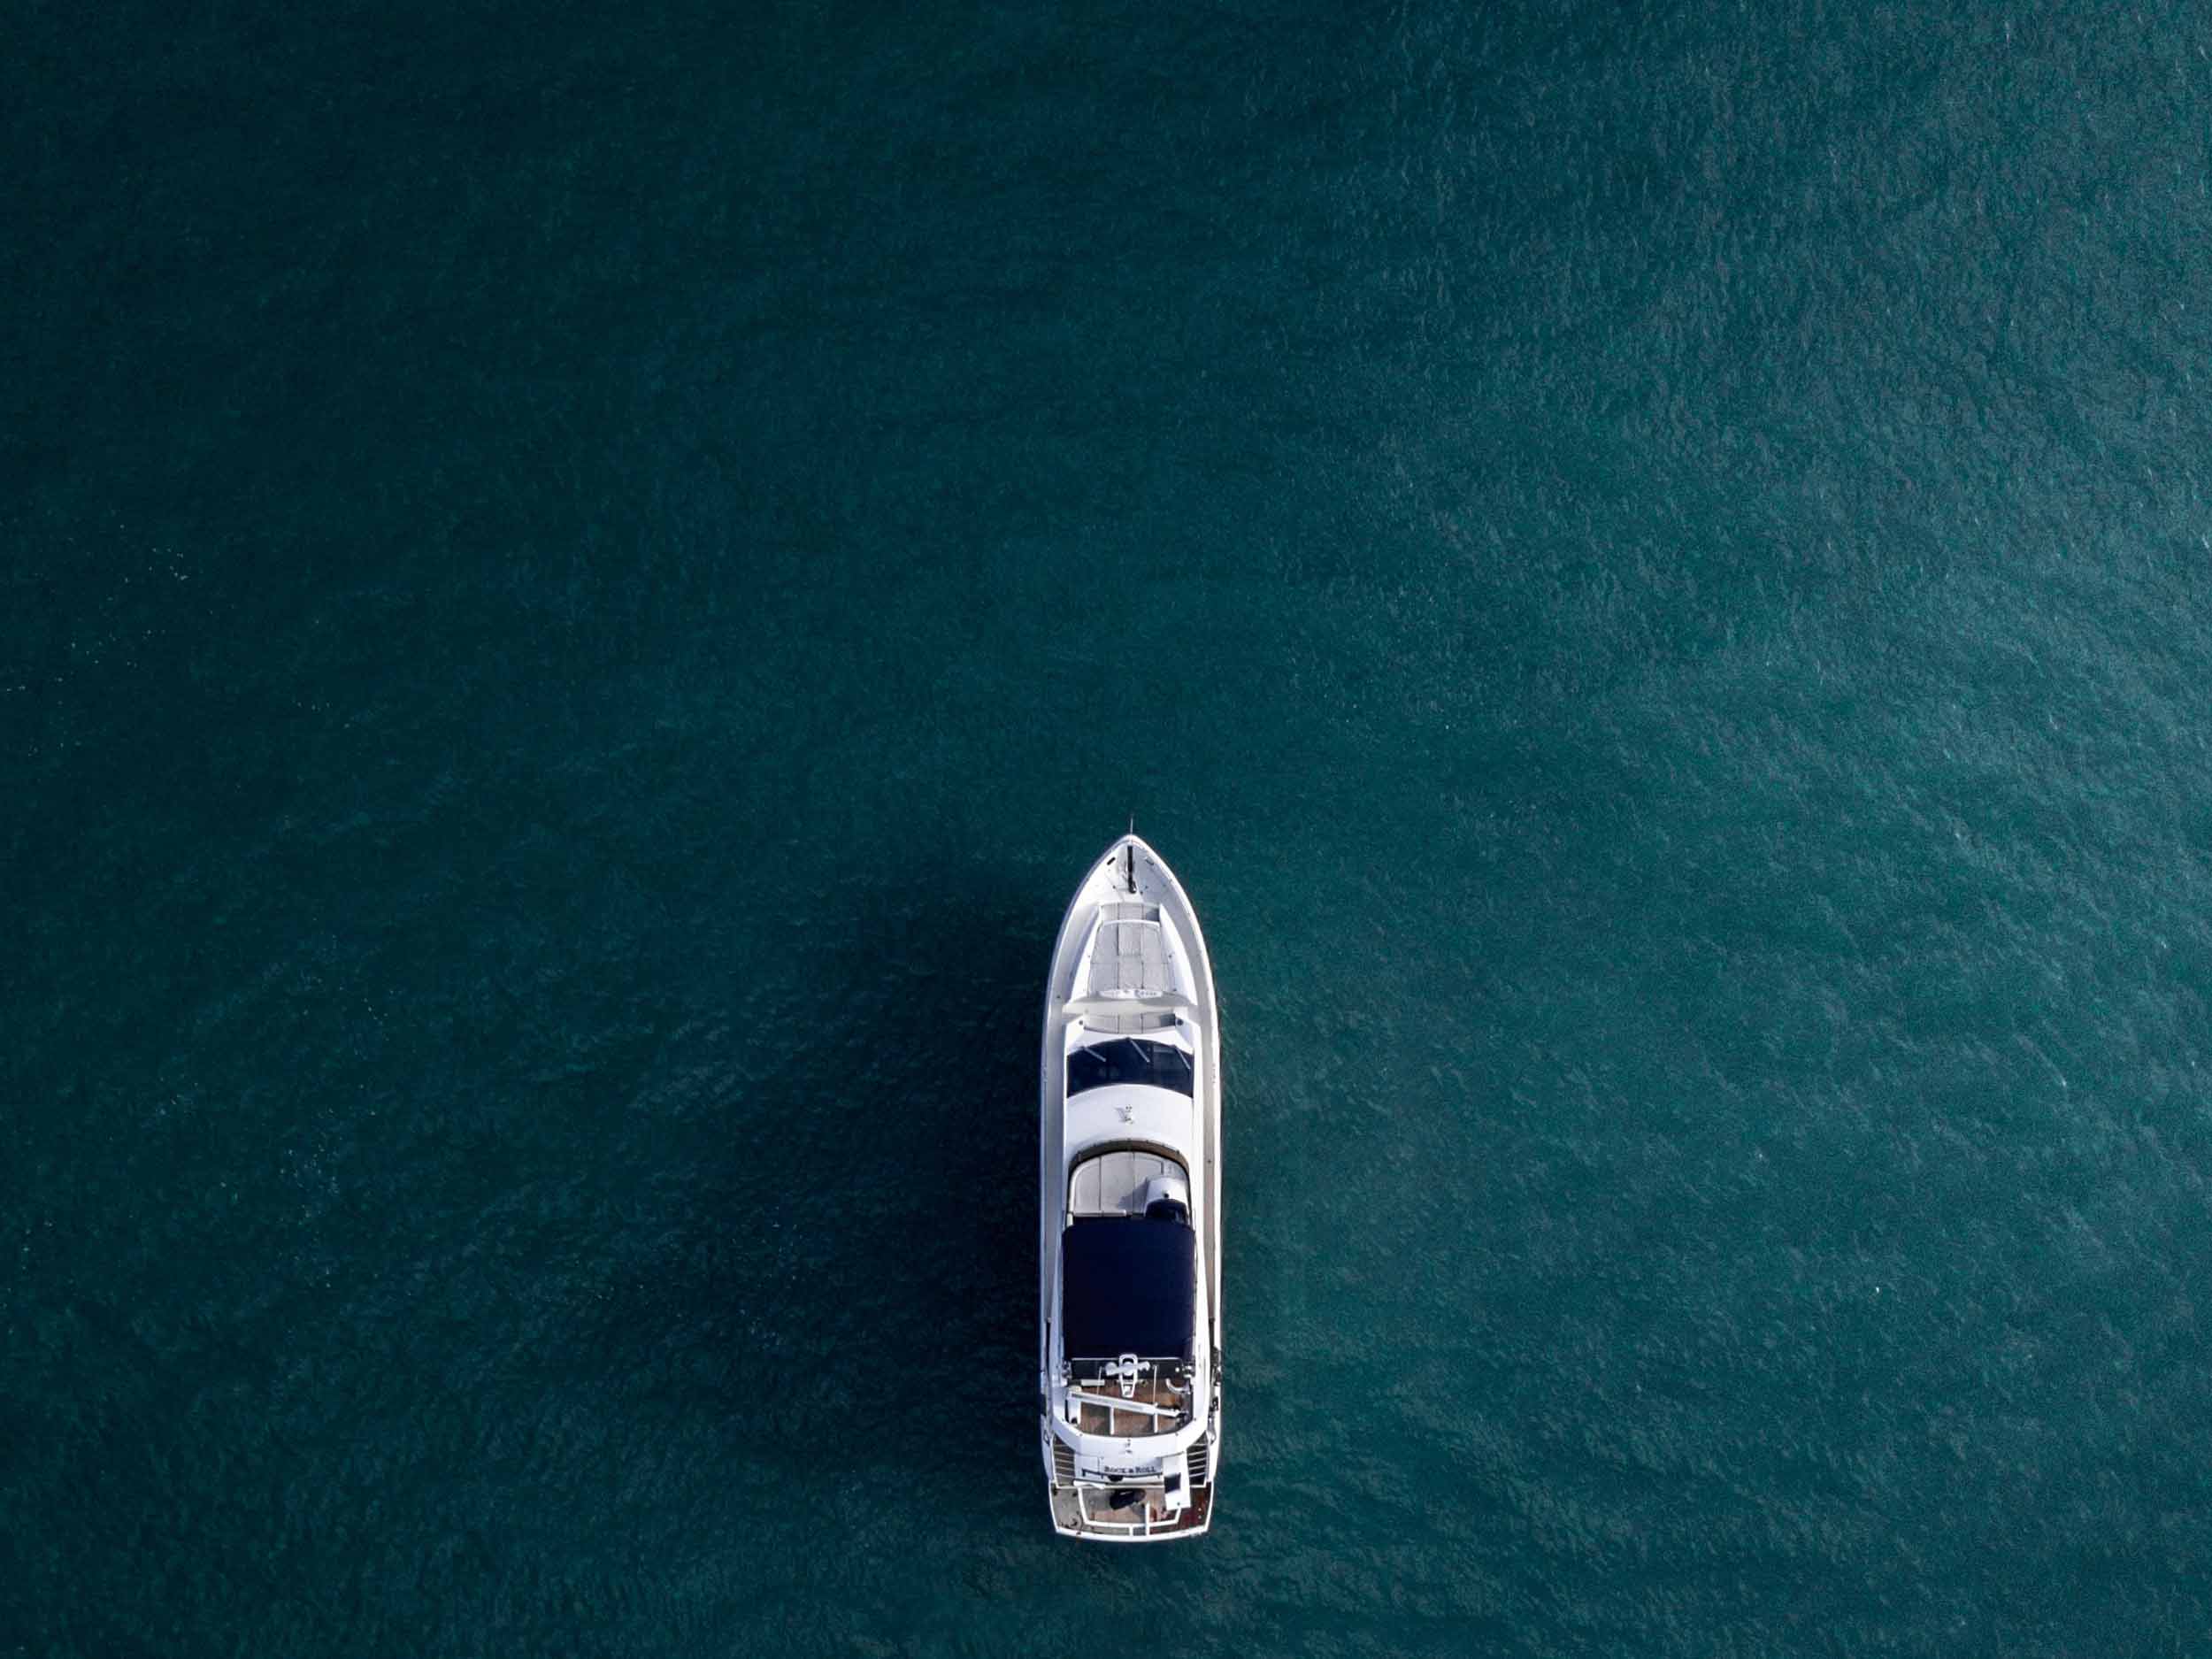 A aerial view of a boat.